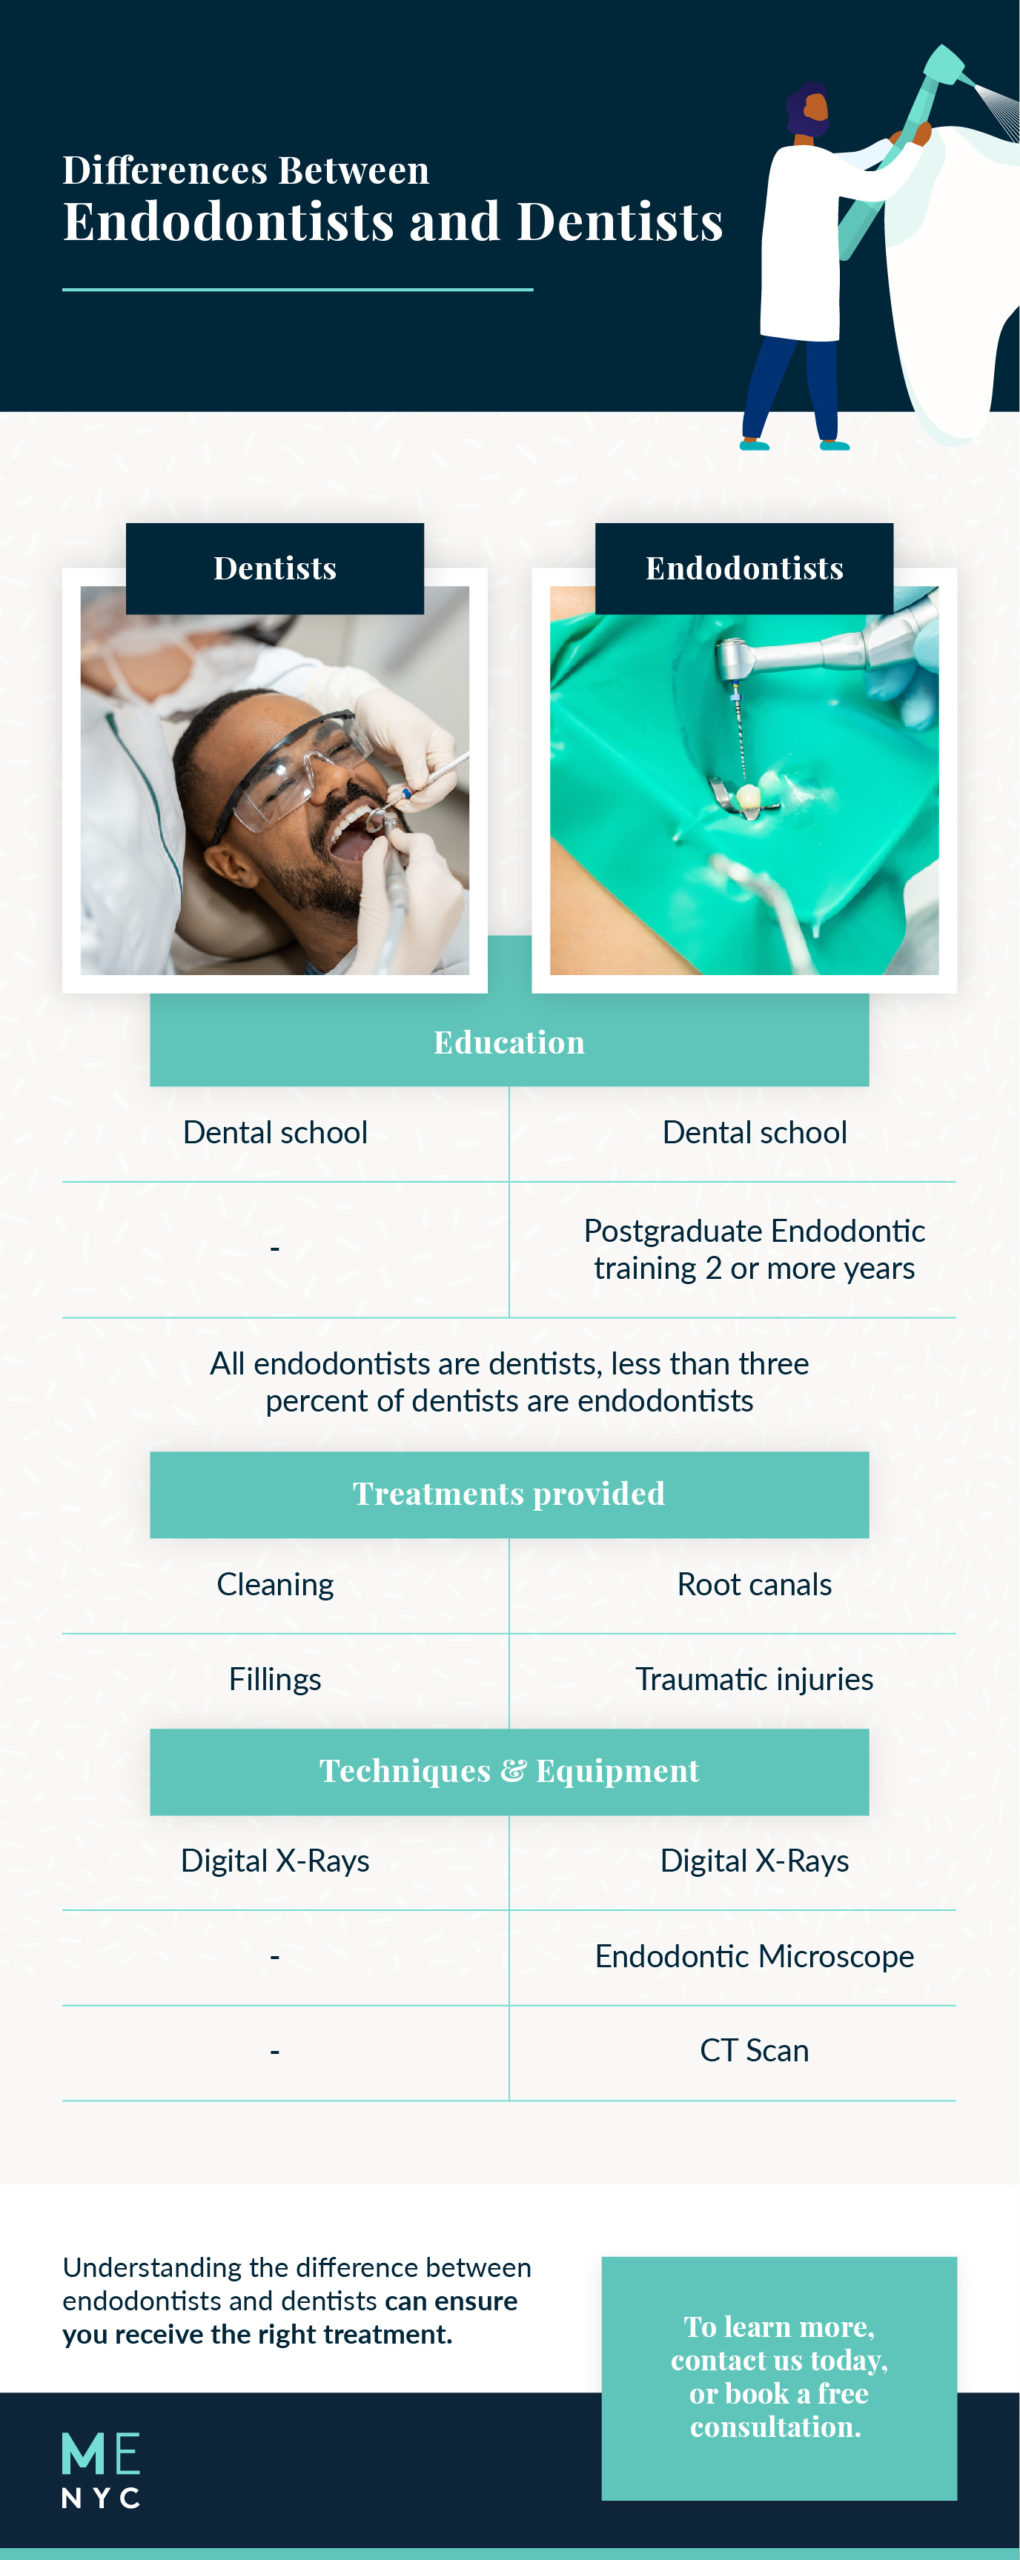 Differences Between Endodontists and Dentists